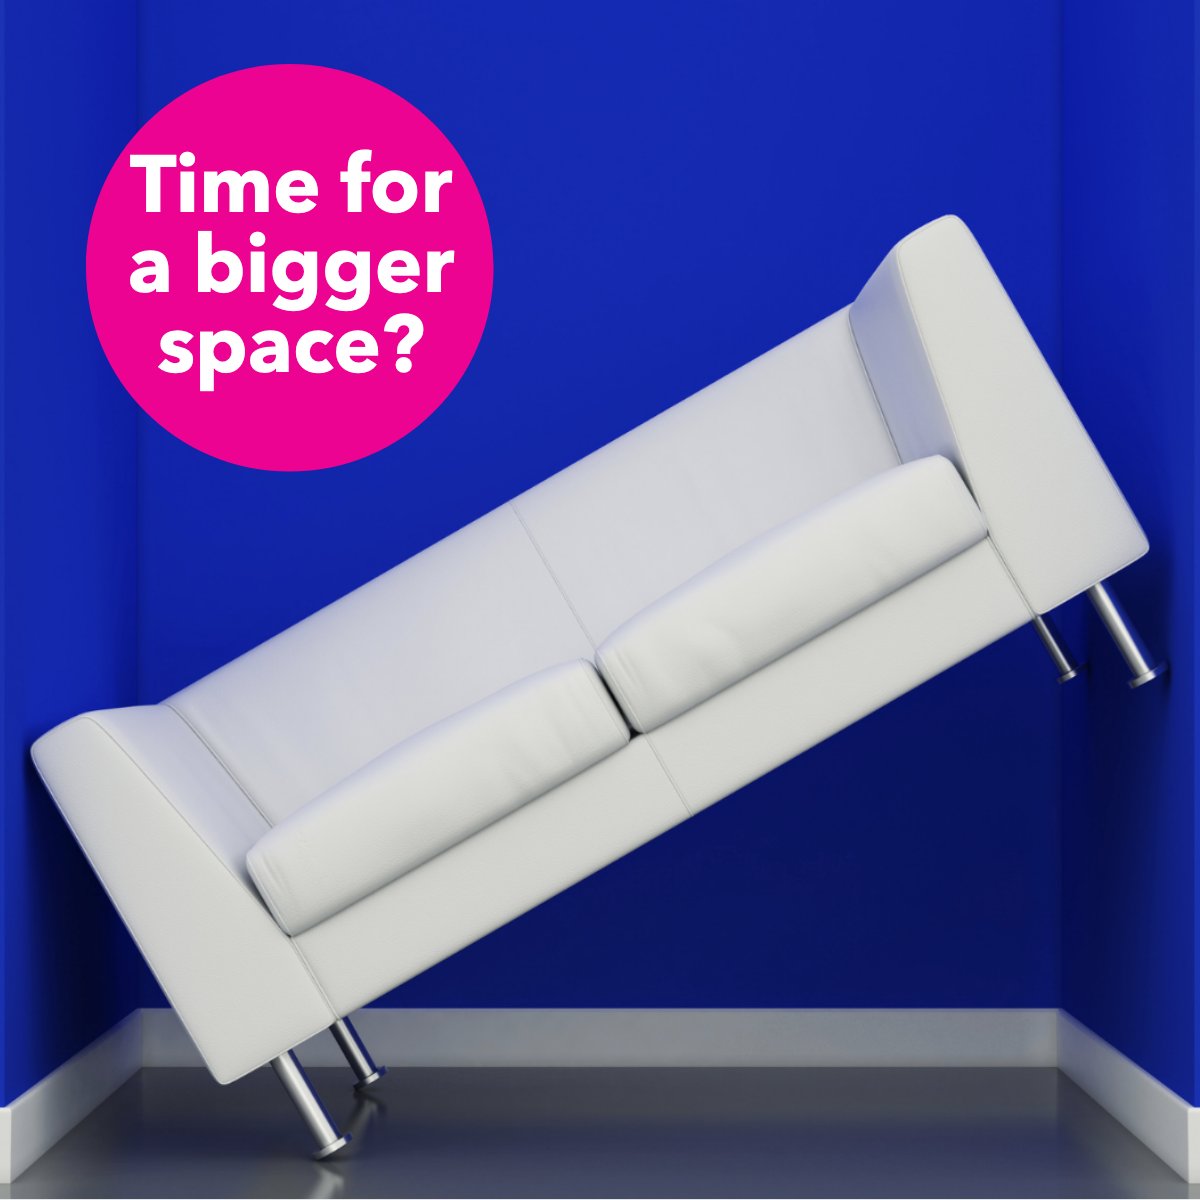 Are you ready for a bigger space? 🤔

Let us know below!

#spaces #spacedesign #spacer #biggerspaces
 #mattmorano #realestate #realtor #mooresville #lakenorman #realty #houses #homes #charlotte #home #realtyonegroup